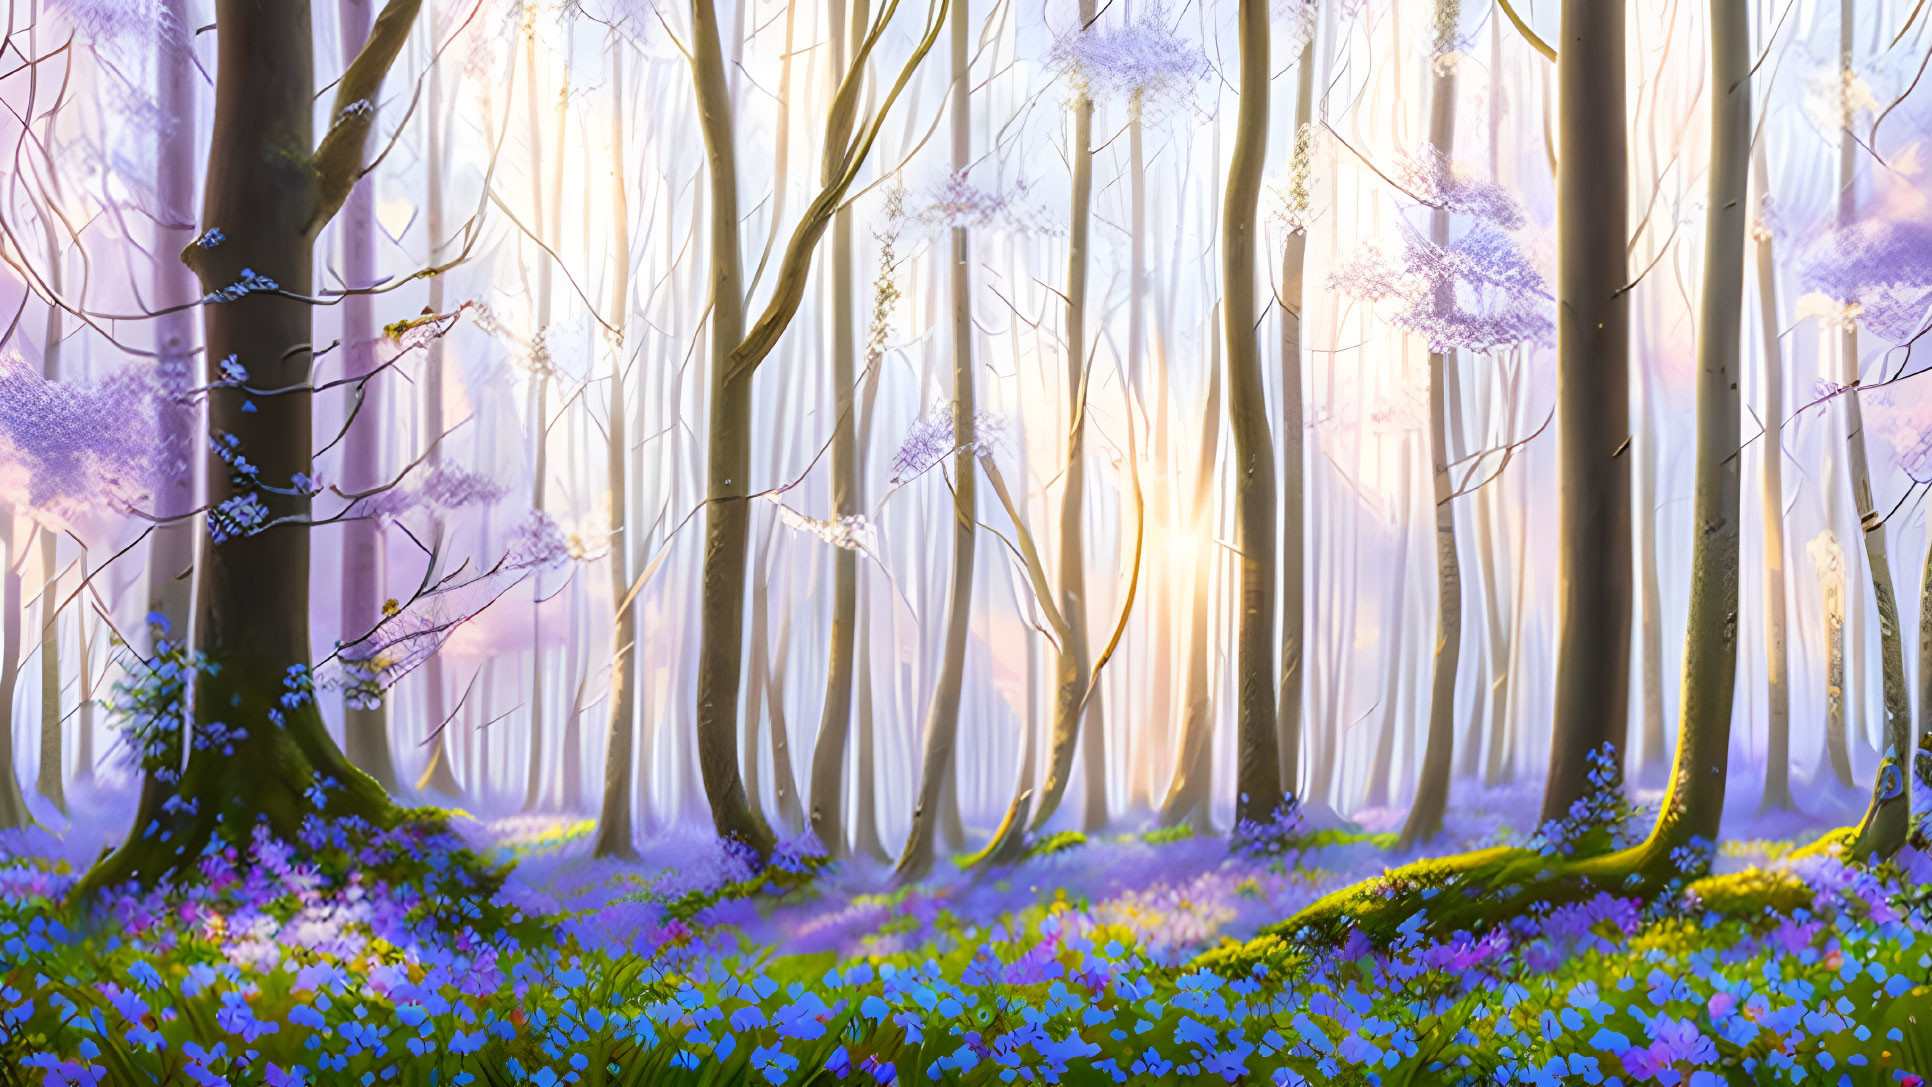 Enchanting forest scene with purple and blue flowers under sunlight